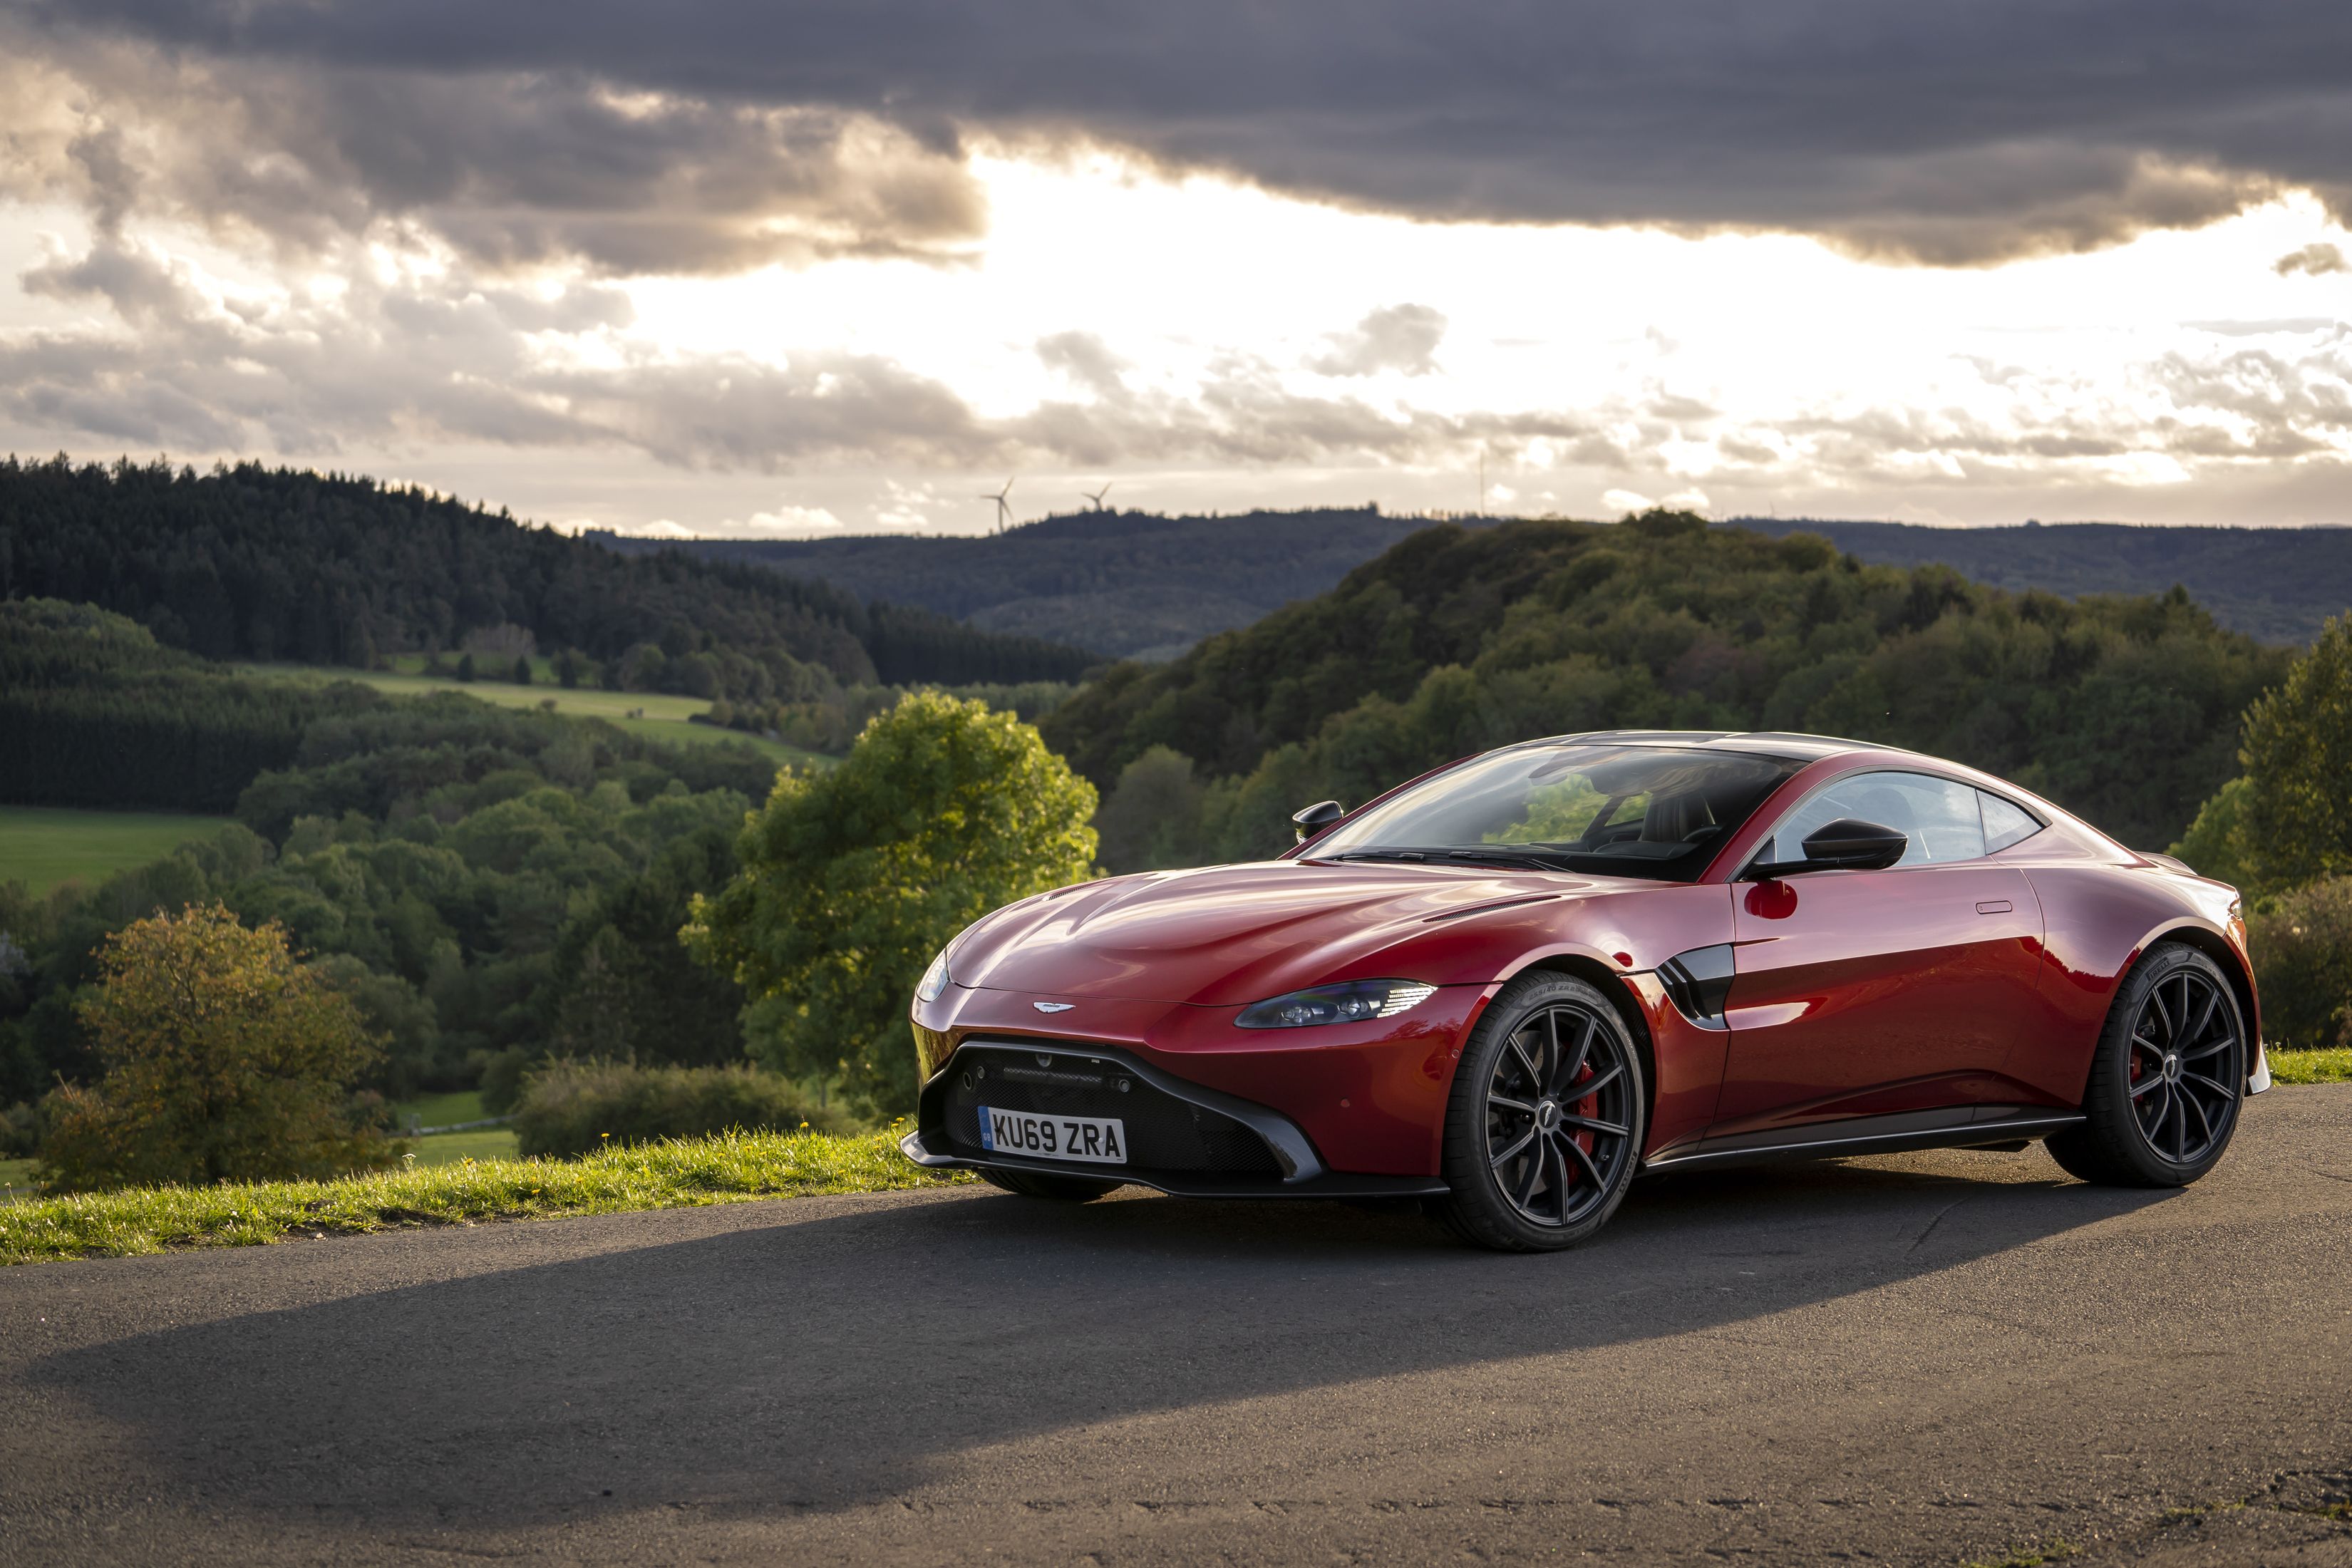 2020 Aston Martin Vantage Review, Pricing, and Specs